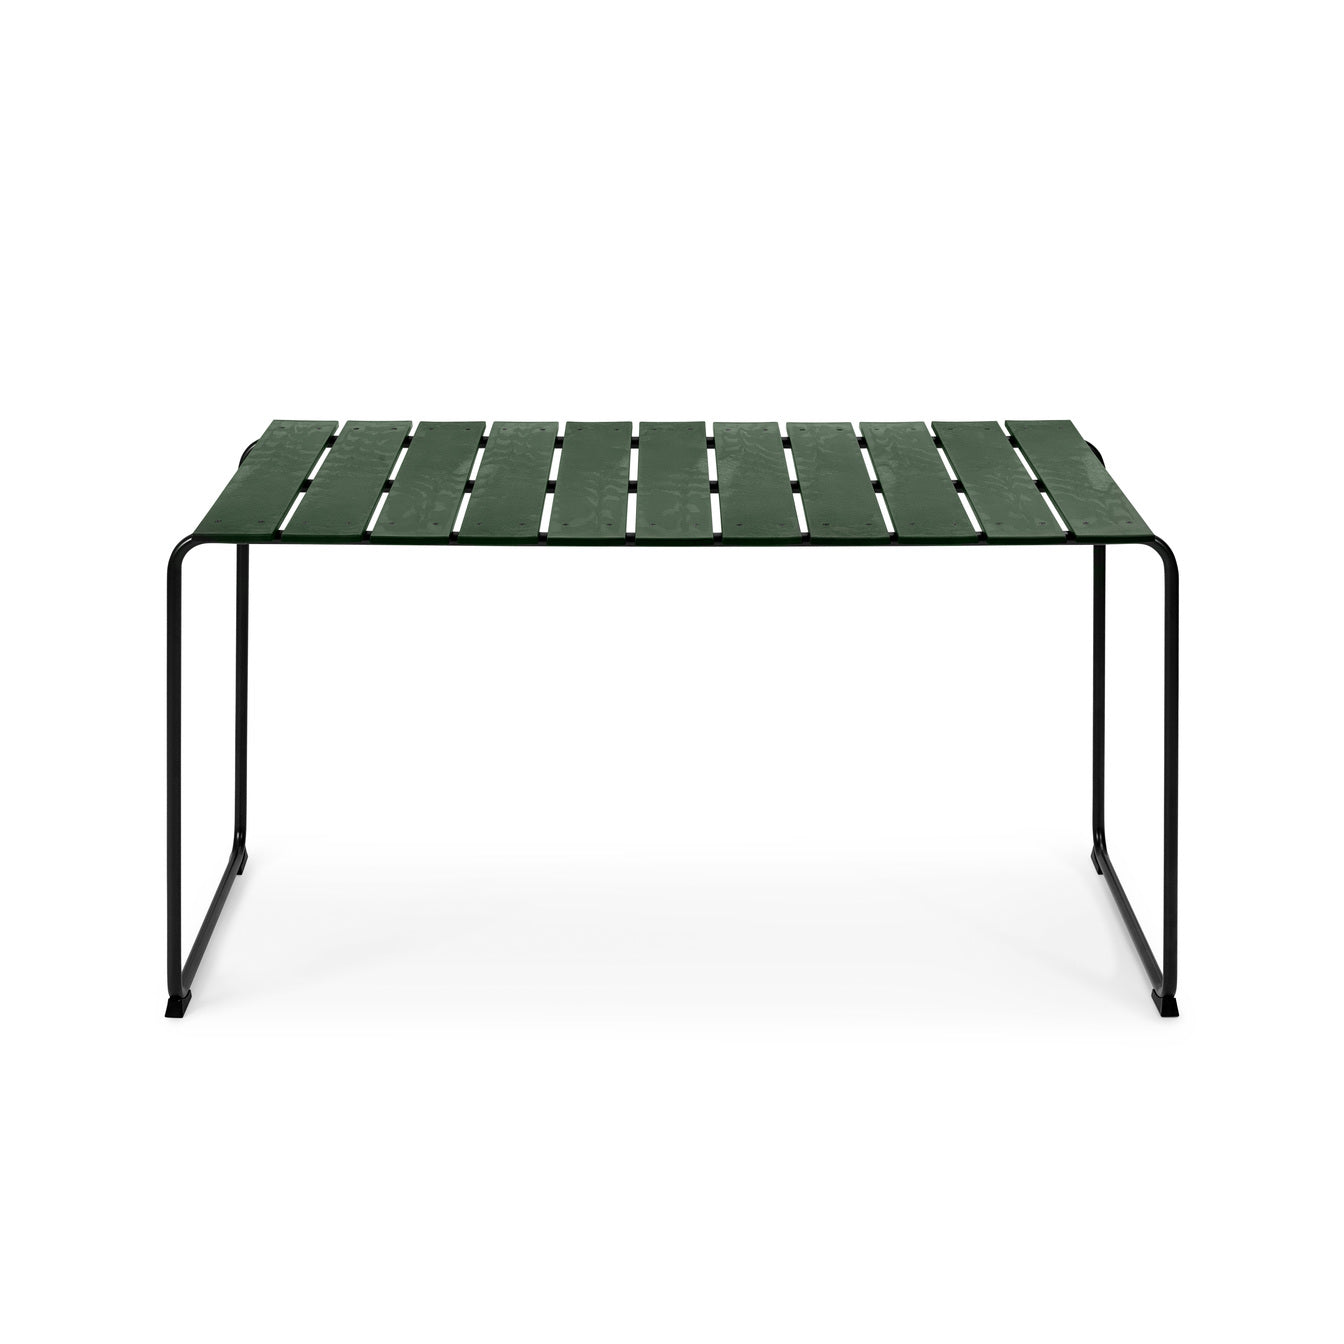 Mater Ocean OC2 Table - 4 Person